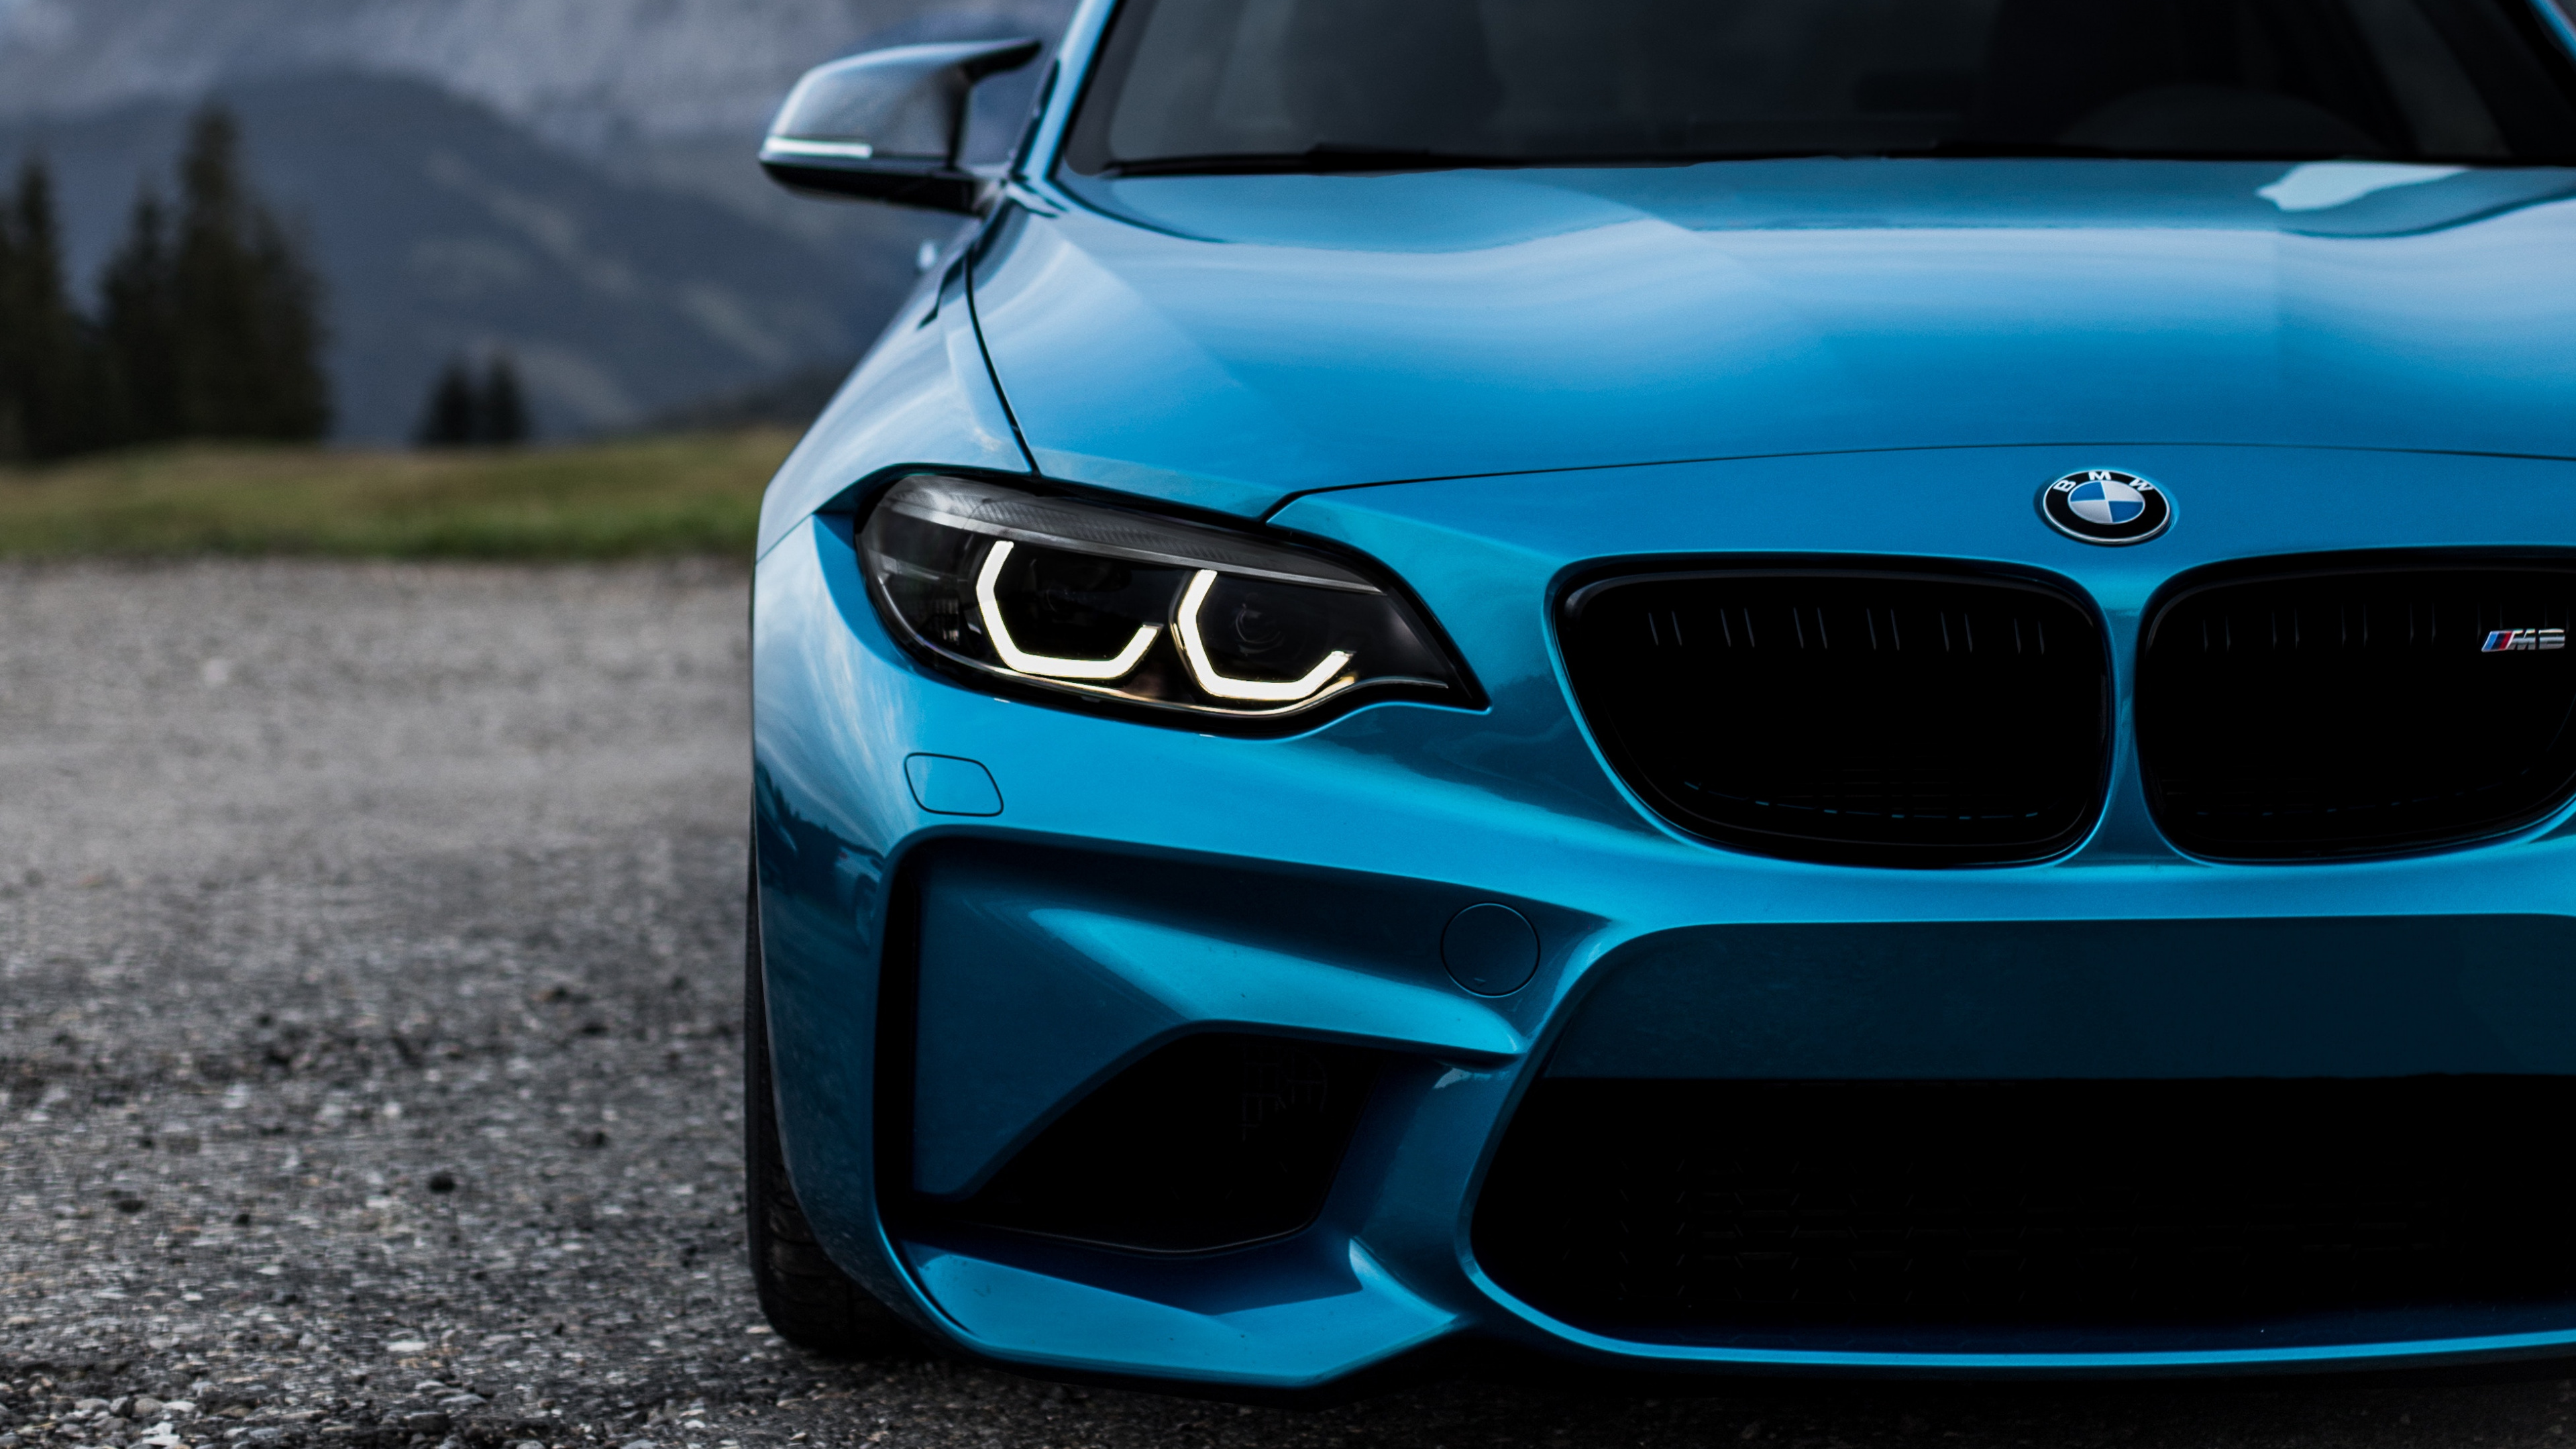 Blue Bmw m 3 on Road During Daytime. Wallpaper in 3840x2160 Resolution